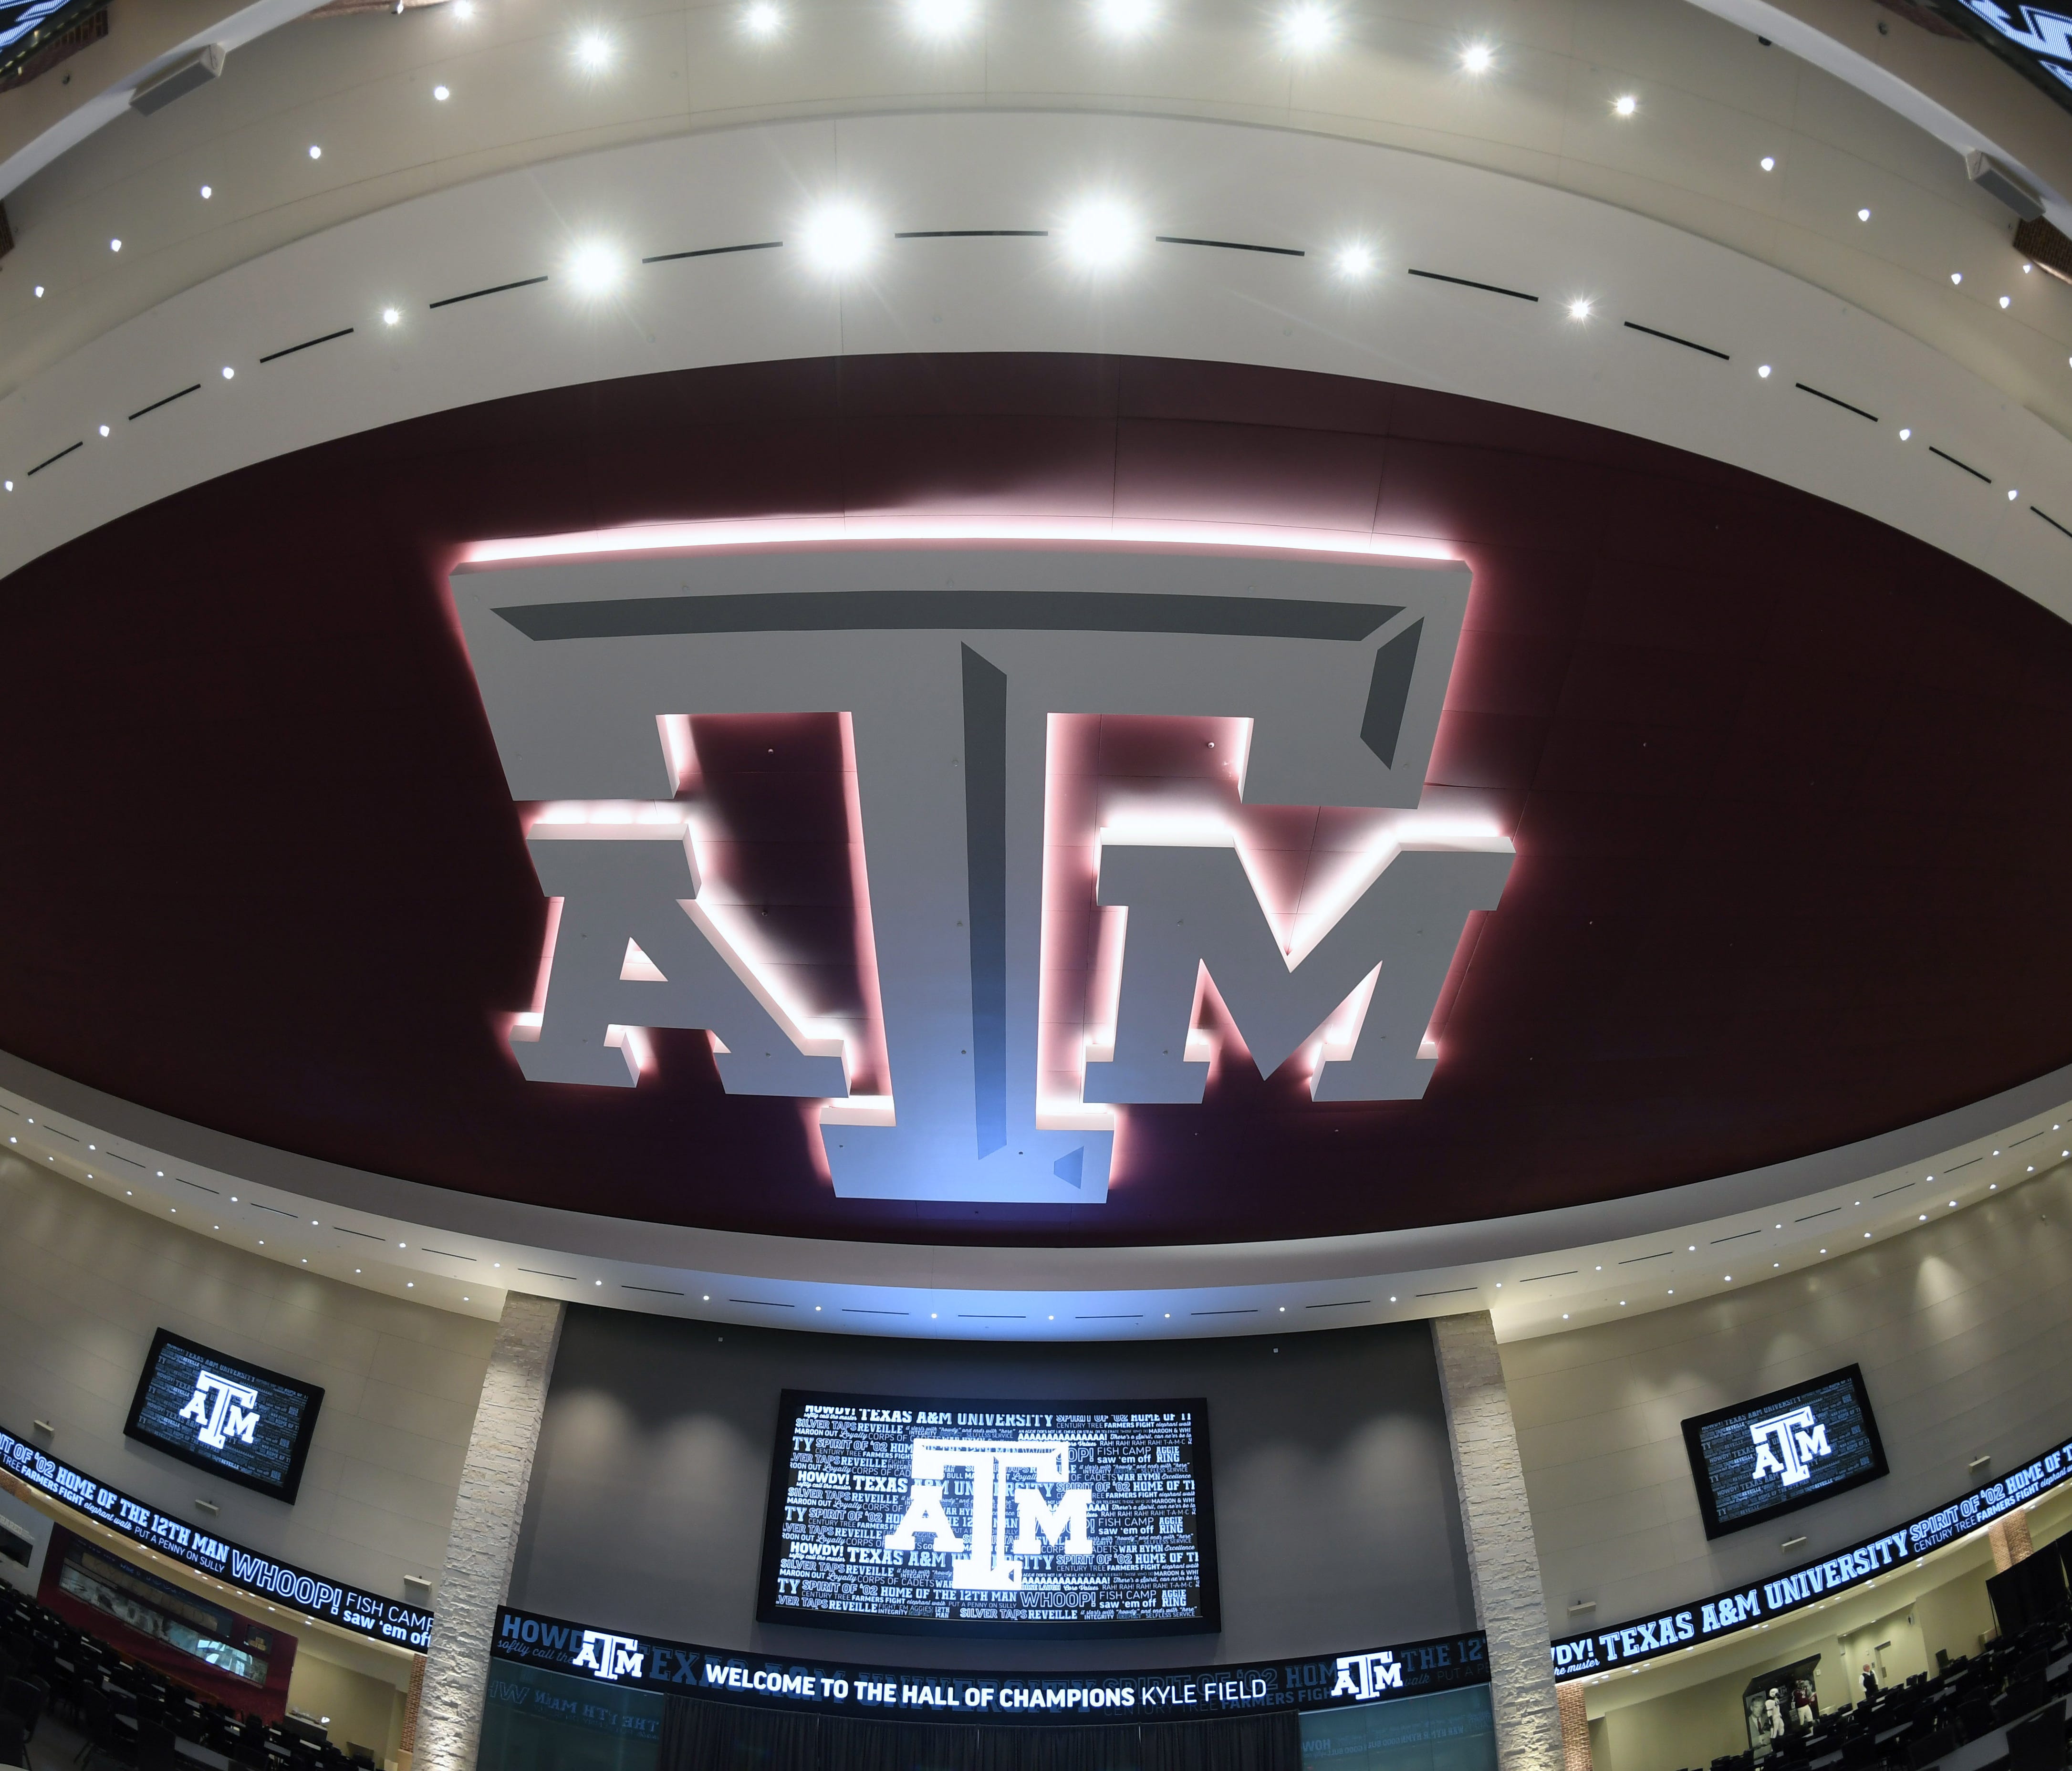 General overall view of the Texas A&M Aggies logo at the Hall of Champions at Kyle Field.